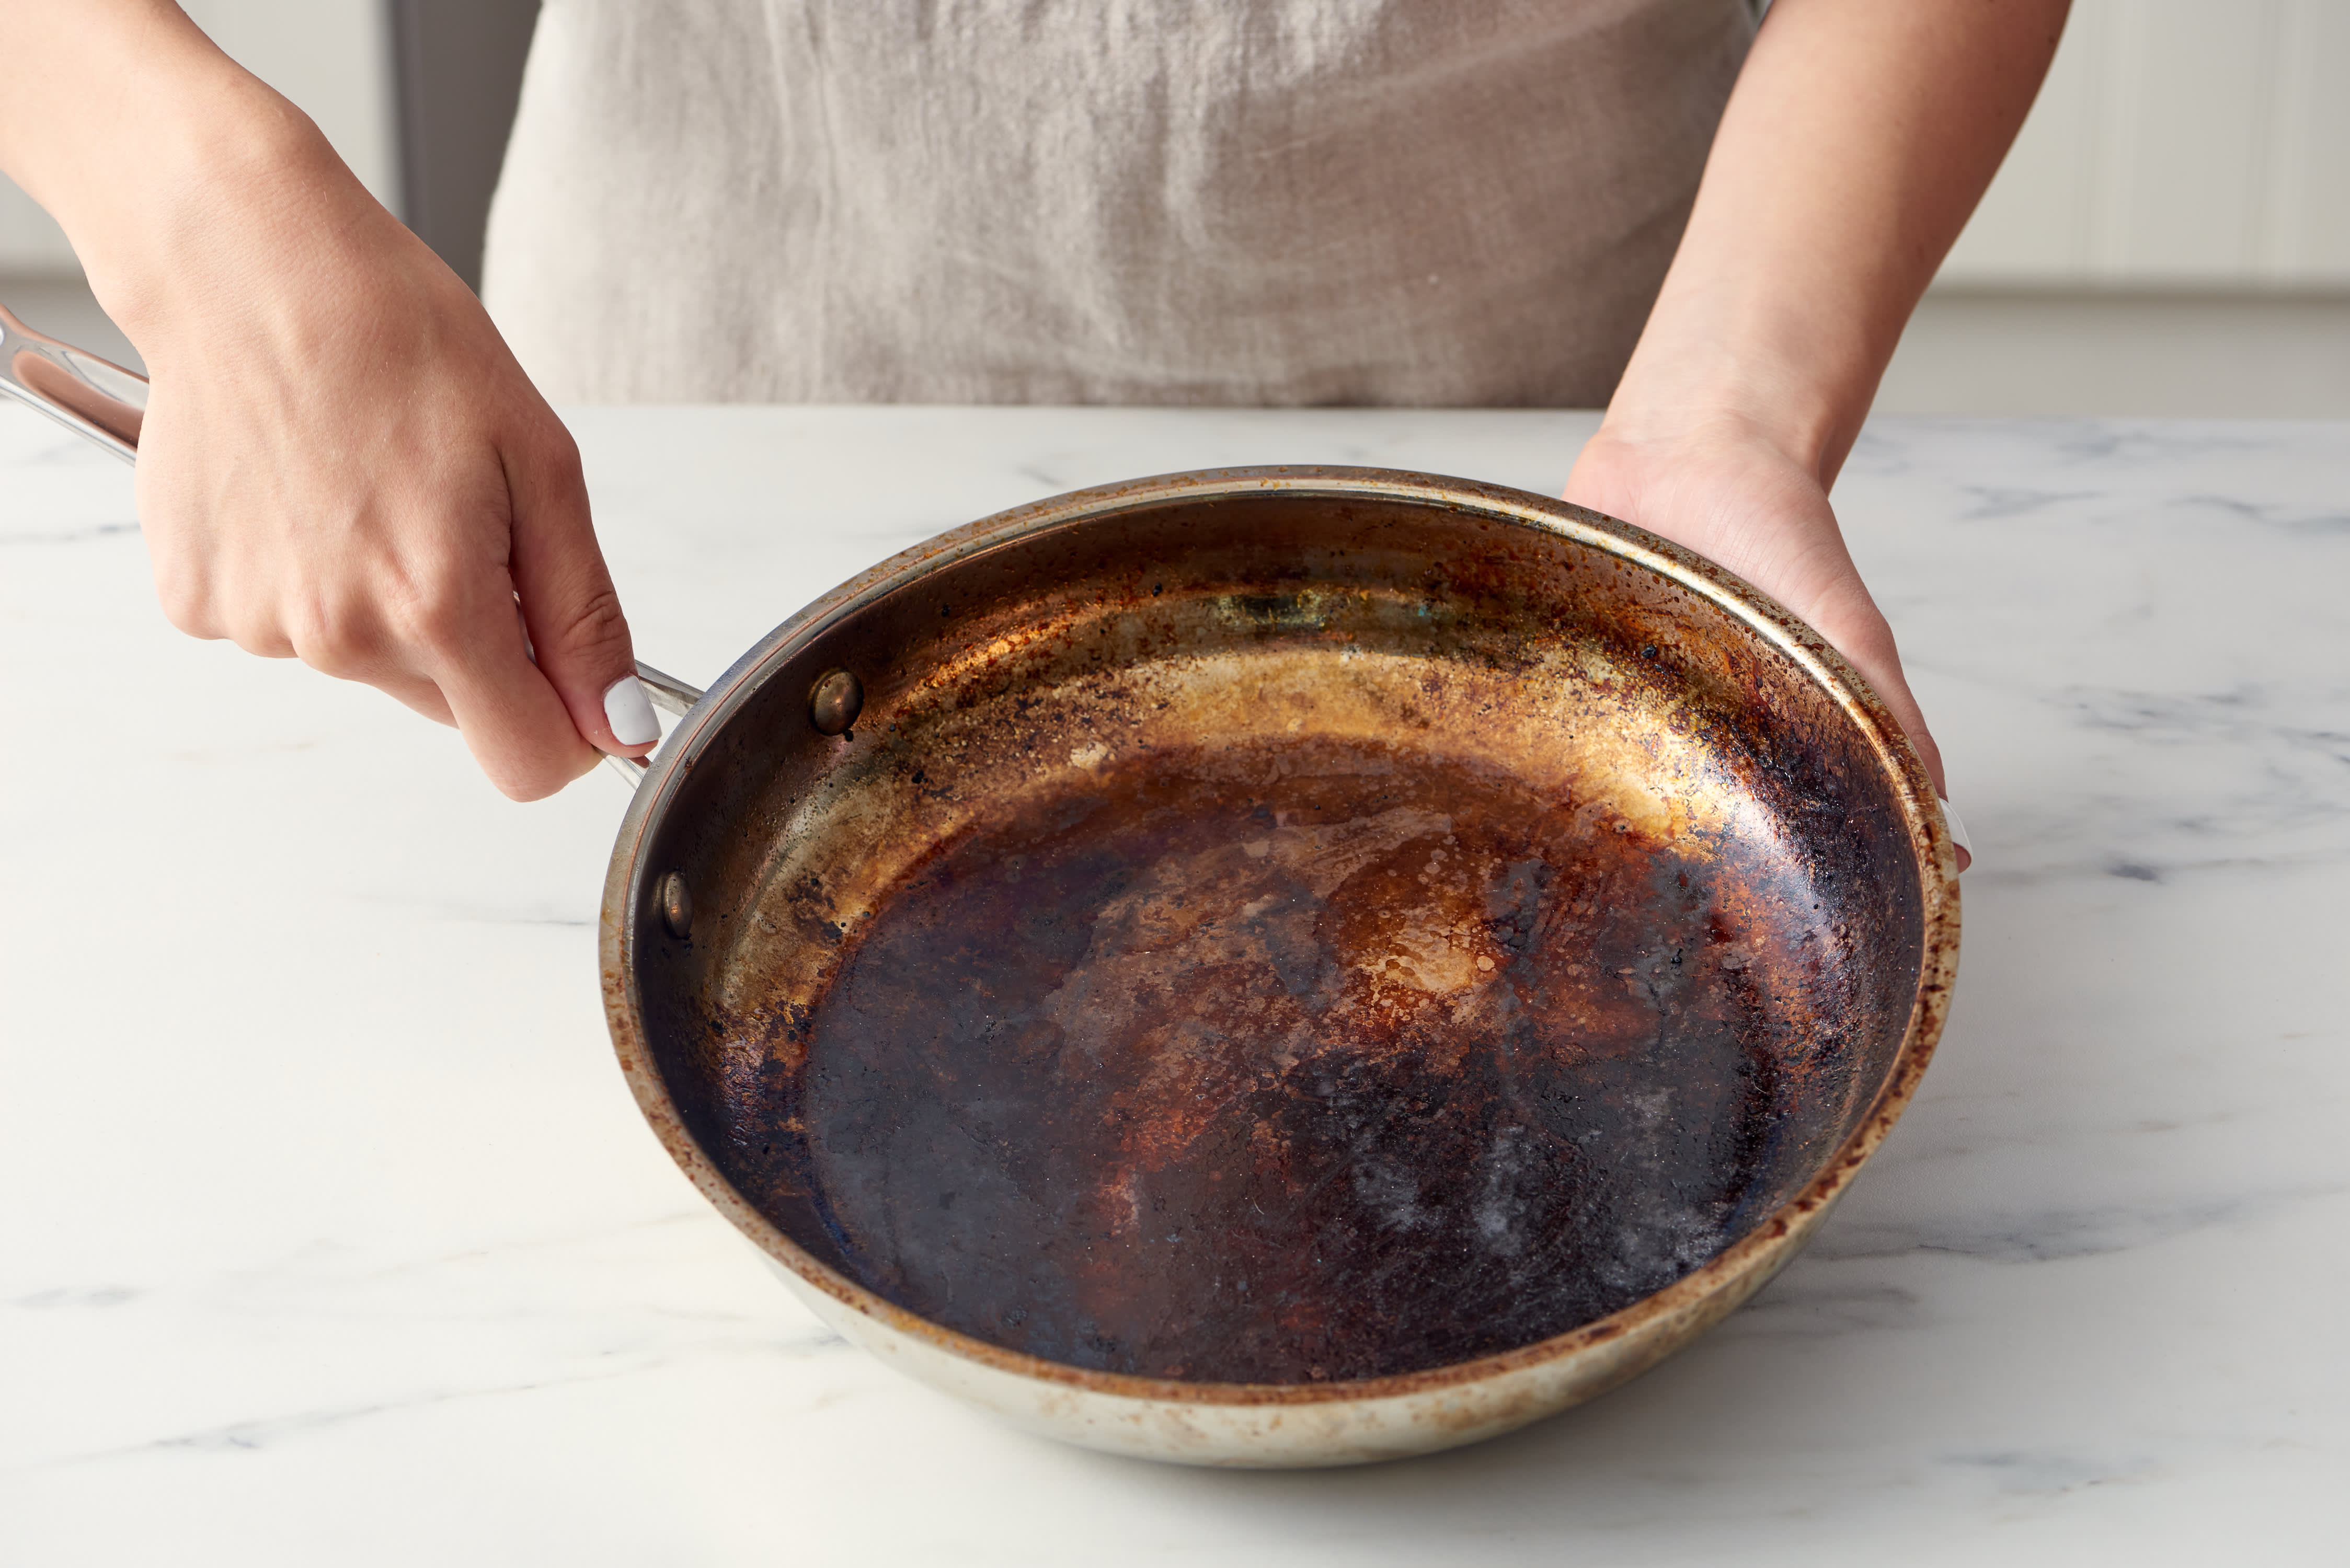 An Easy Way to Prevent Burns from Hot Pans